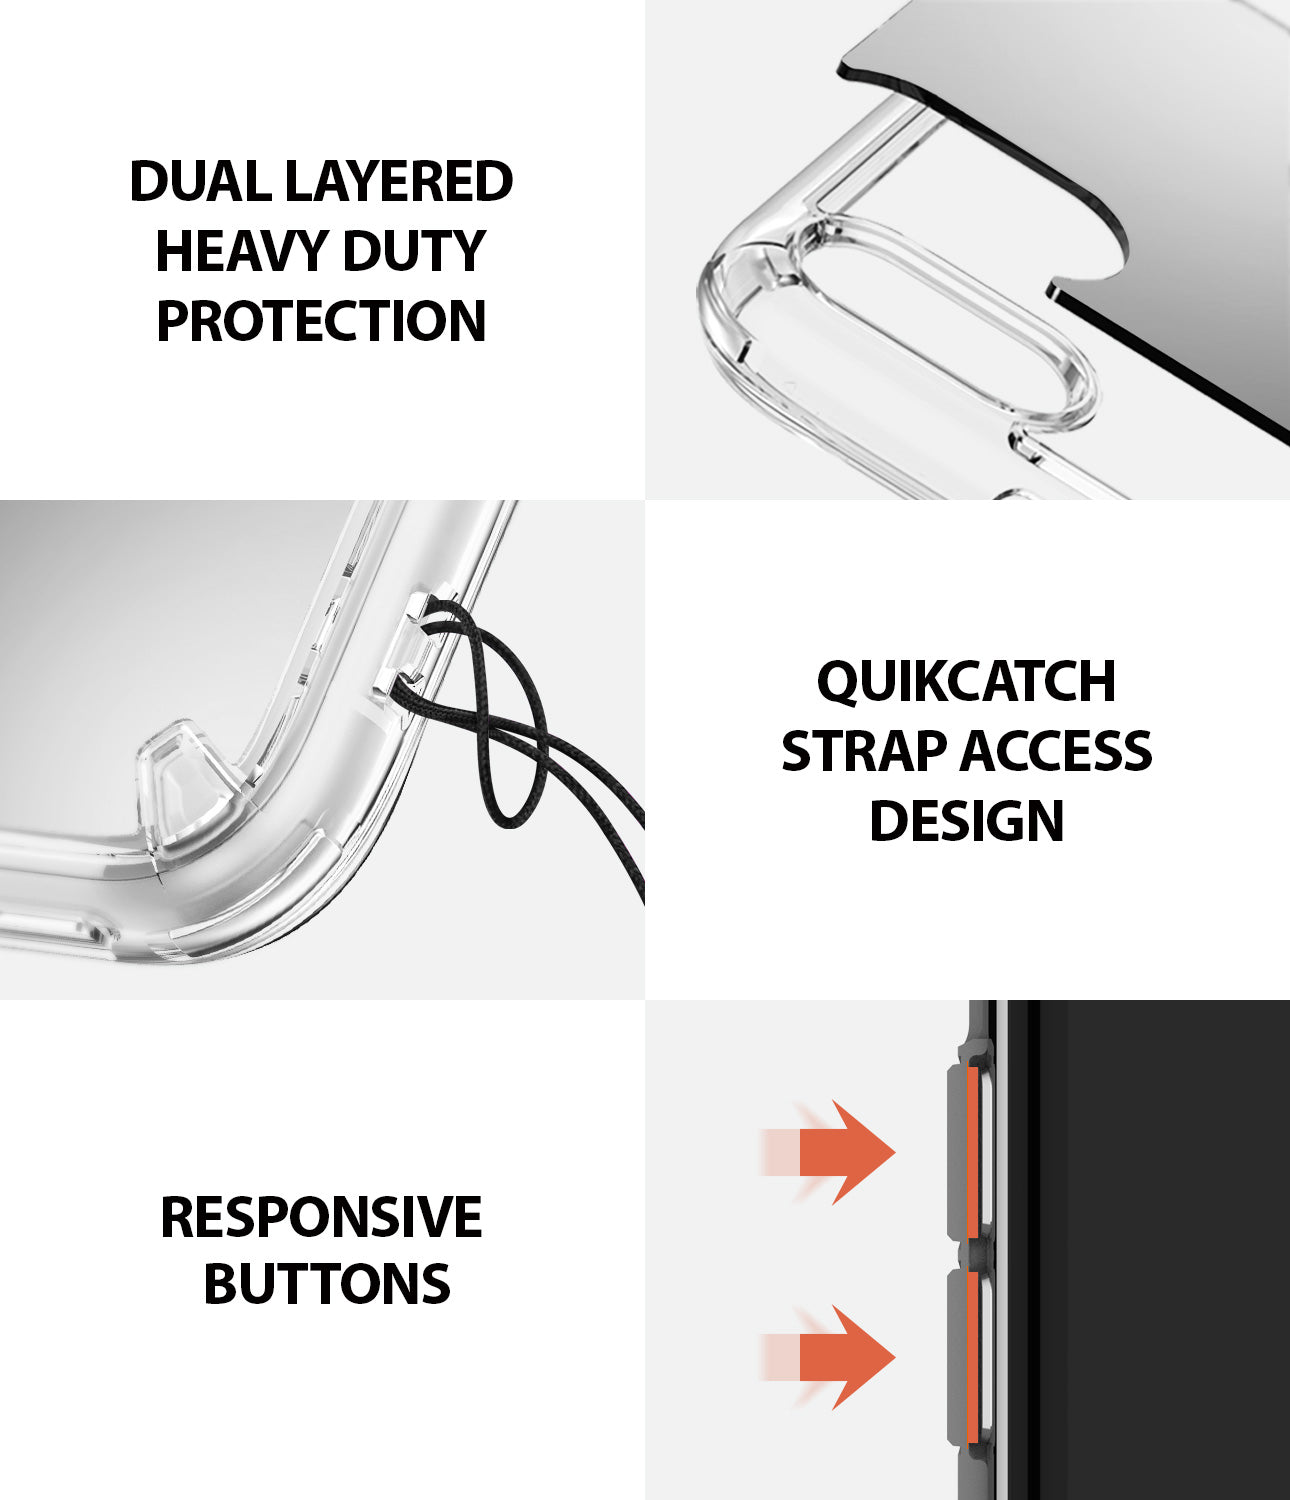 iPhone XR Case | Mirror - Dual Layered Heavy Duty Protection. Quikcatch Strap Access Design. Responsible Buttons